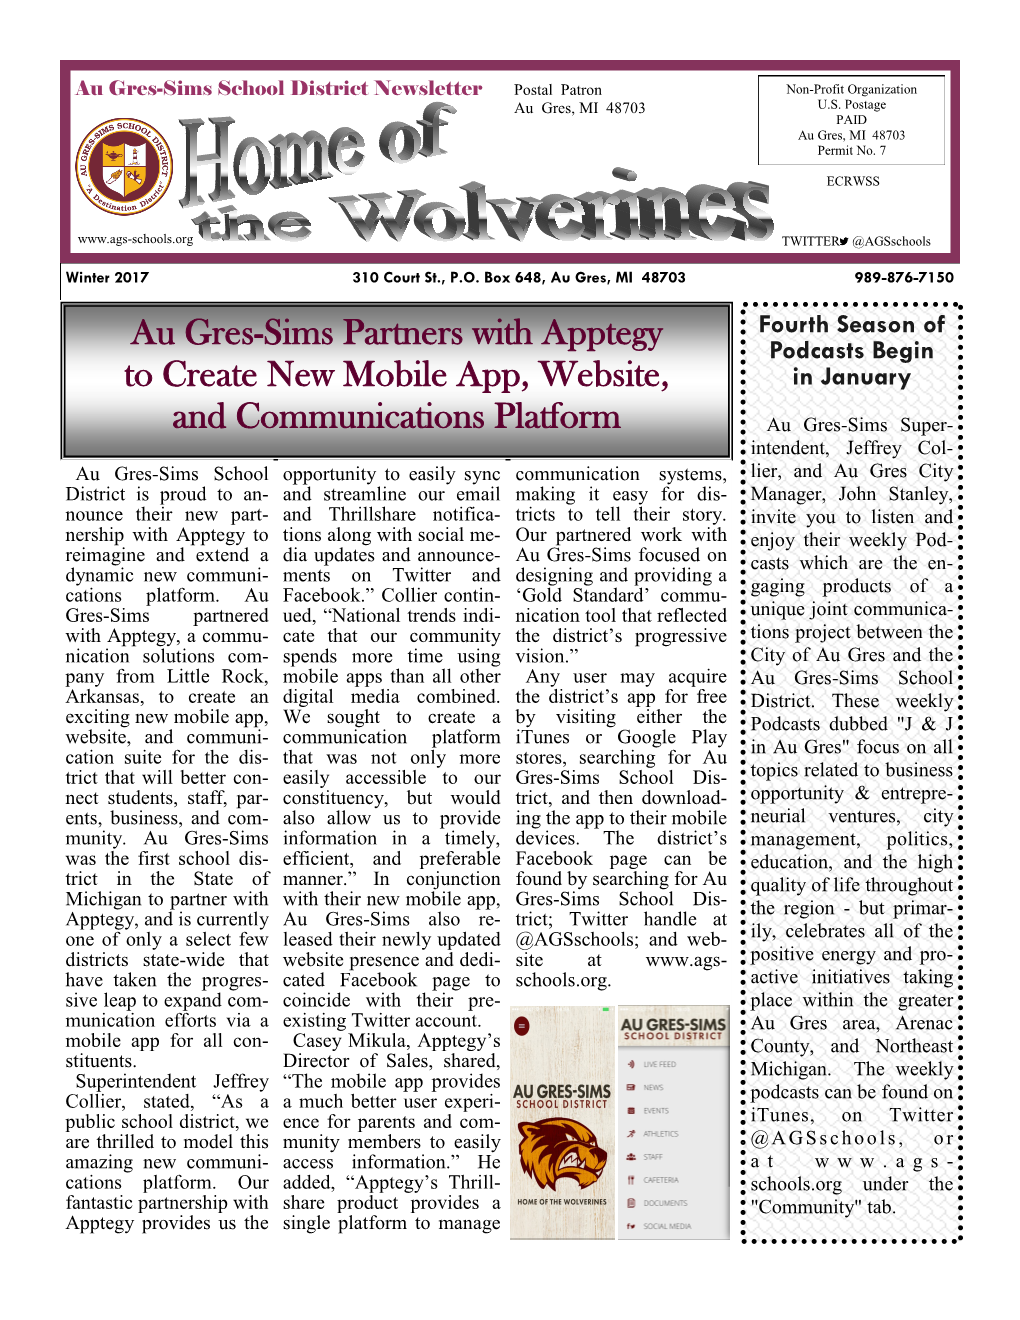 Au Gres-Sims Partners with Apptegy to Create New Mobile App, Website